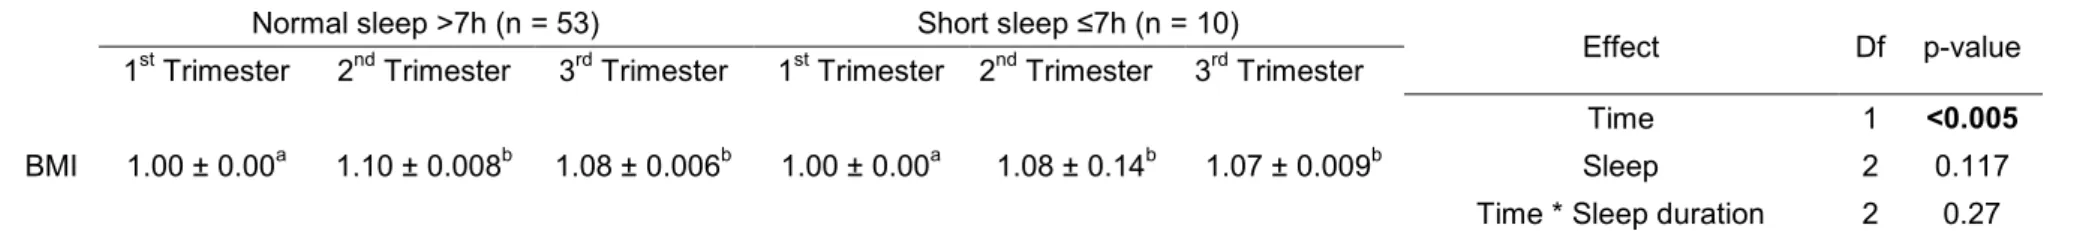 Table  2:  Estimated  measurements  of  the  body  mass  index  according  to  sleep  duration  (≤7  and   &gt;7)  over  the  three  gestational  trimesters (n = 63)